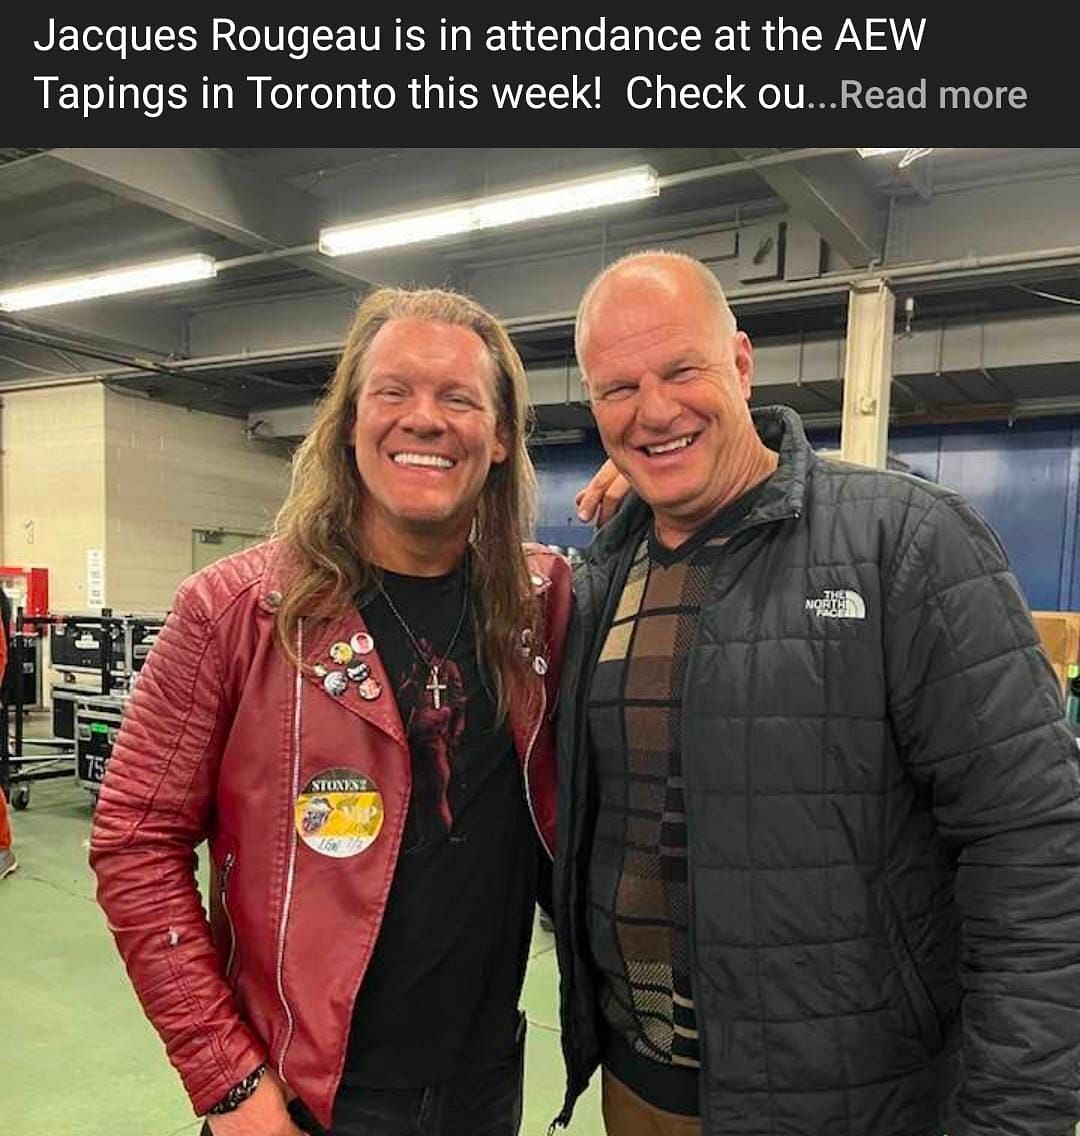 Chris Jericho (left), and Jacques Rougeau aka The Mountie (right).